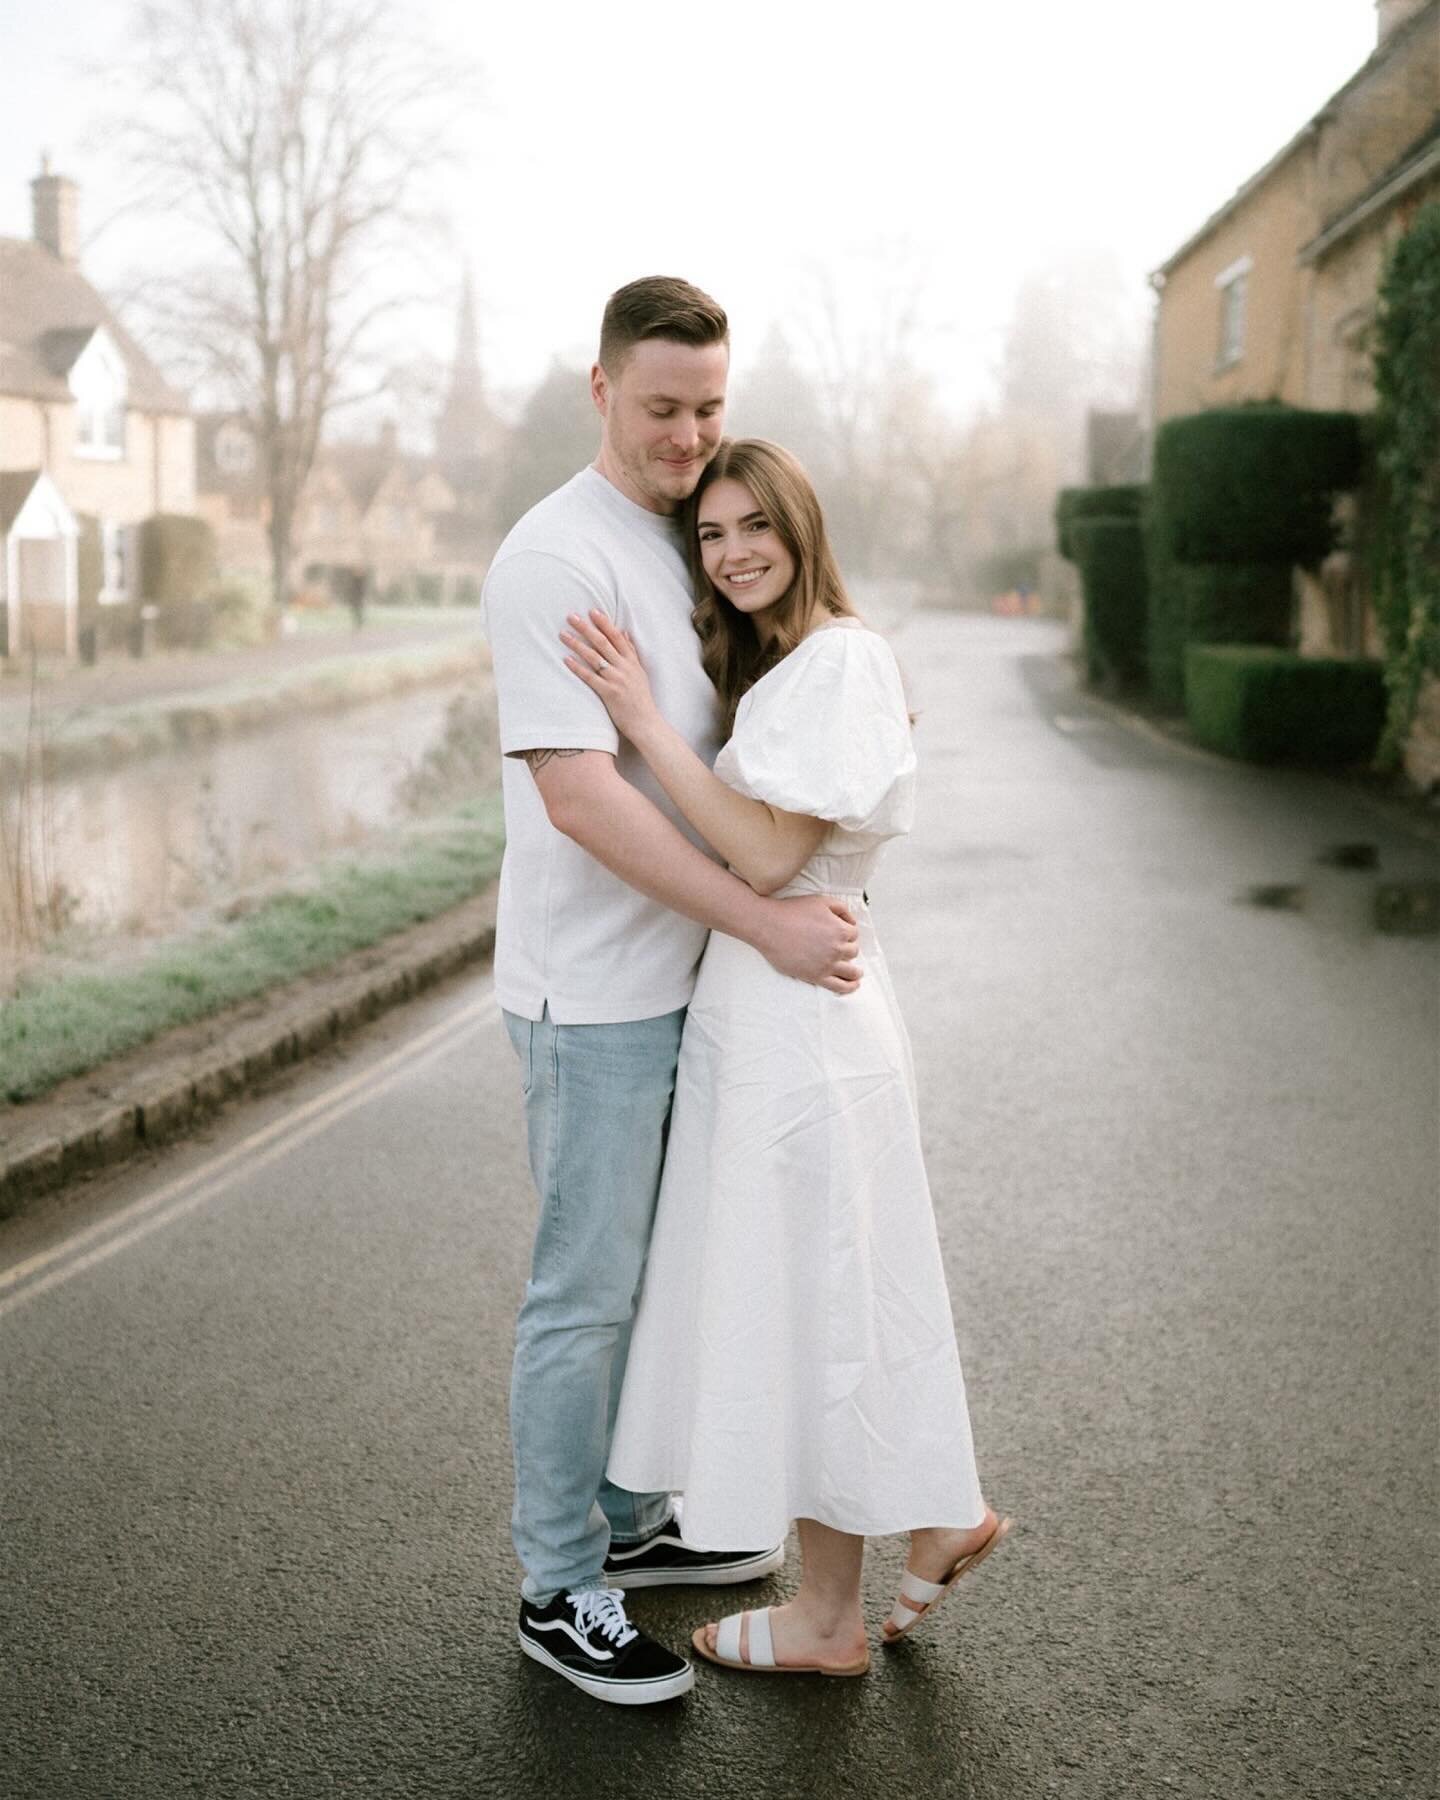 One misty Cotswold morning.

Waking up at the crack of dawn to capture the lovely C&amp;A for their pre wedding shoot. 
One day I would love to live in the Cotswolds ❤️

#hertfordshireweddingphotographer #suffolkweddingphotographer #surreyweddingphot